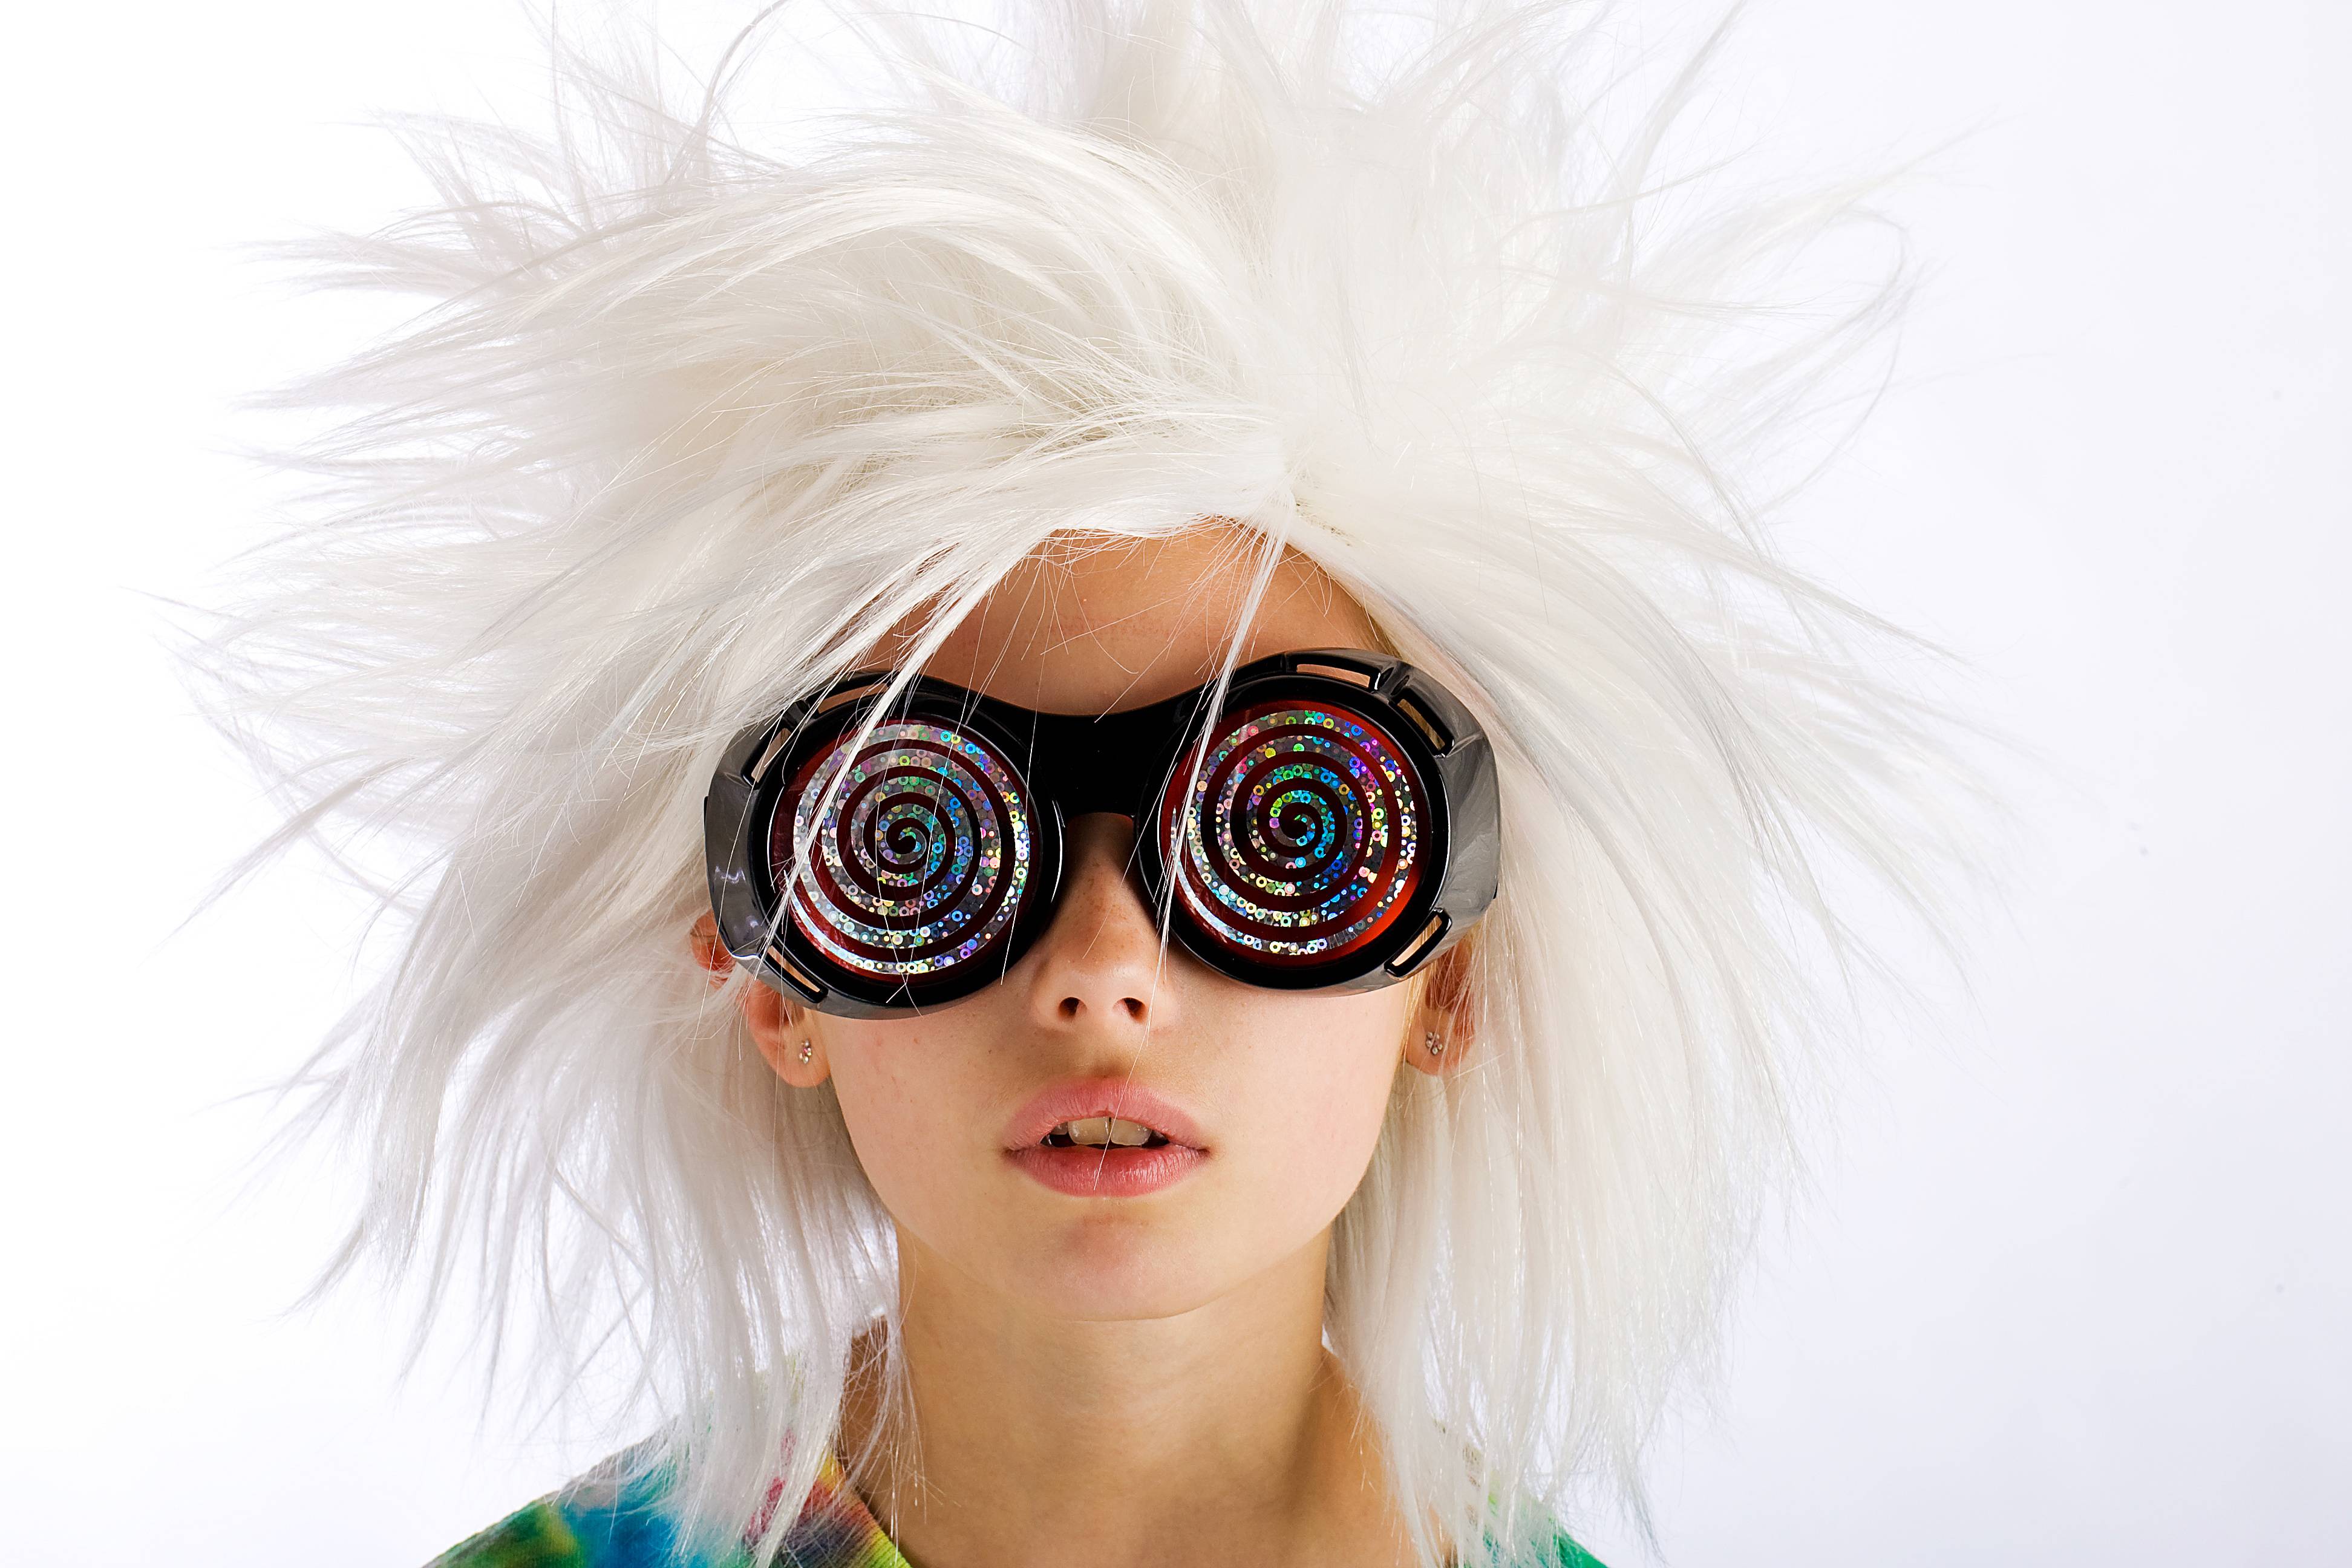 child with a funny wig and crazy eye glasses